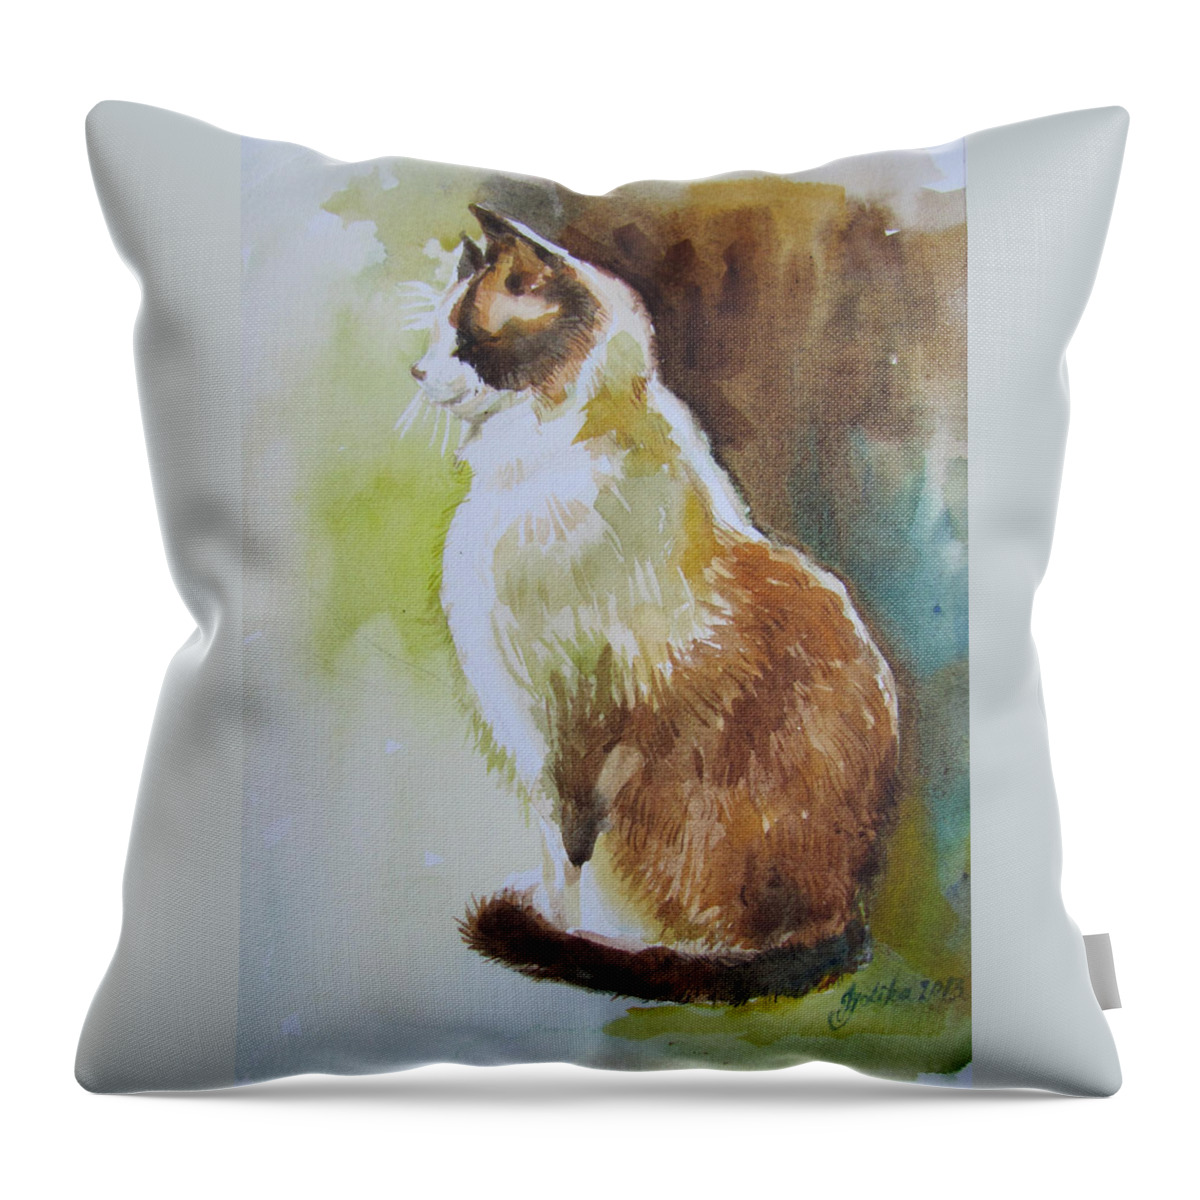 Cat Throw Pillow featuring the painting White and Brown Cat by Jyotika Shroff